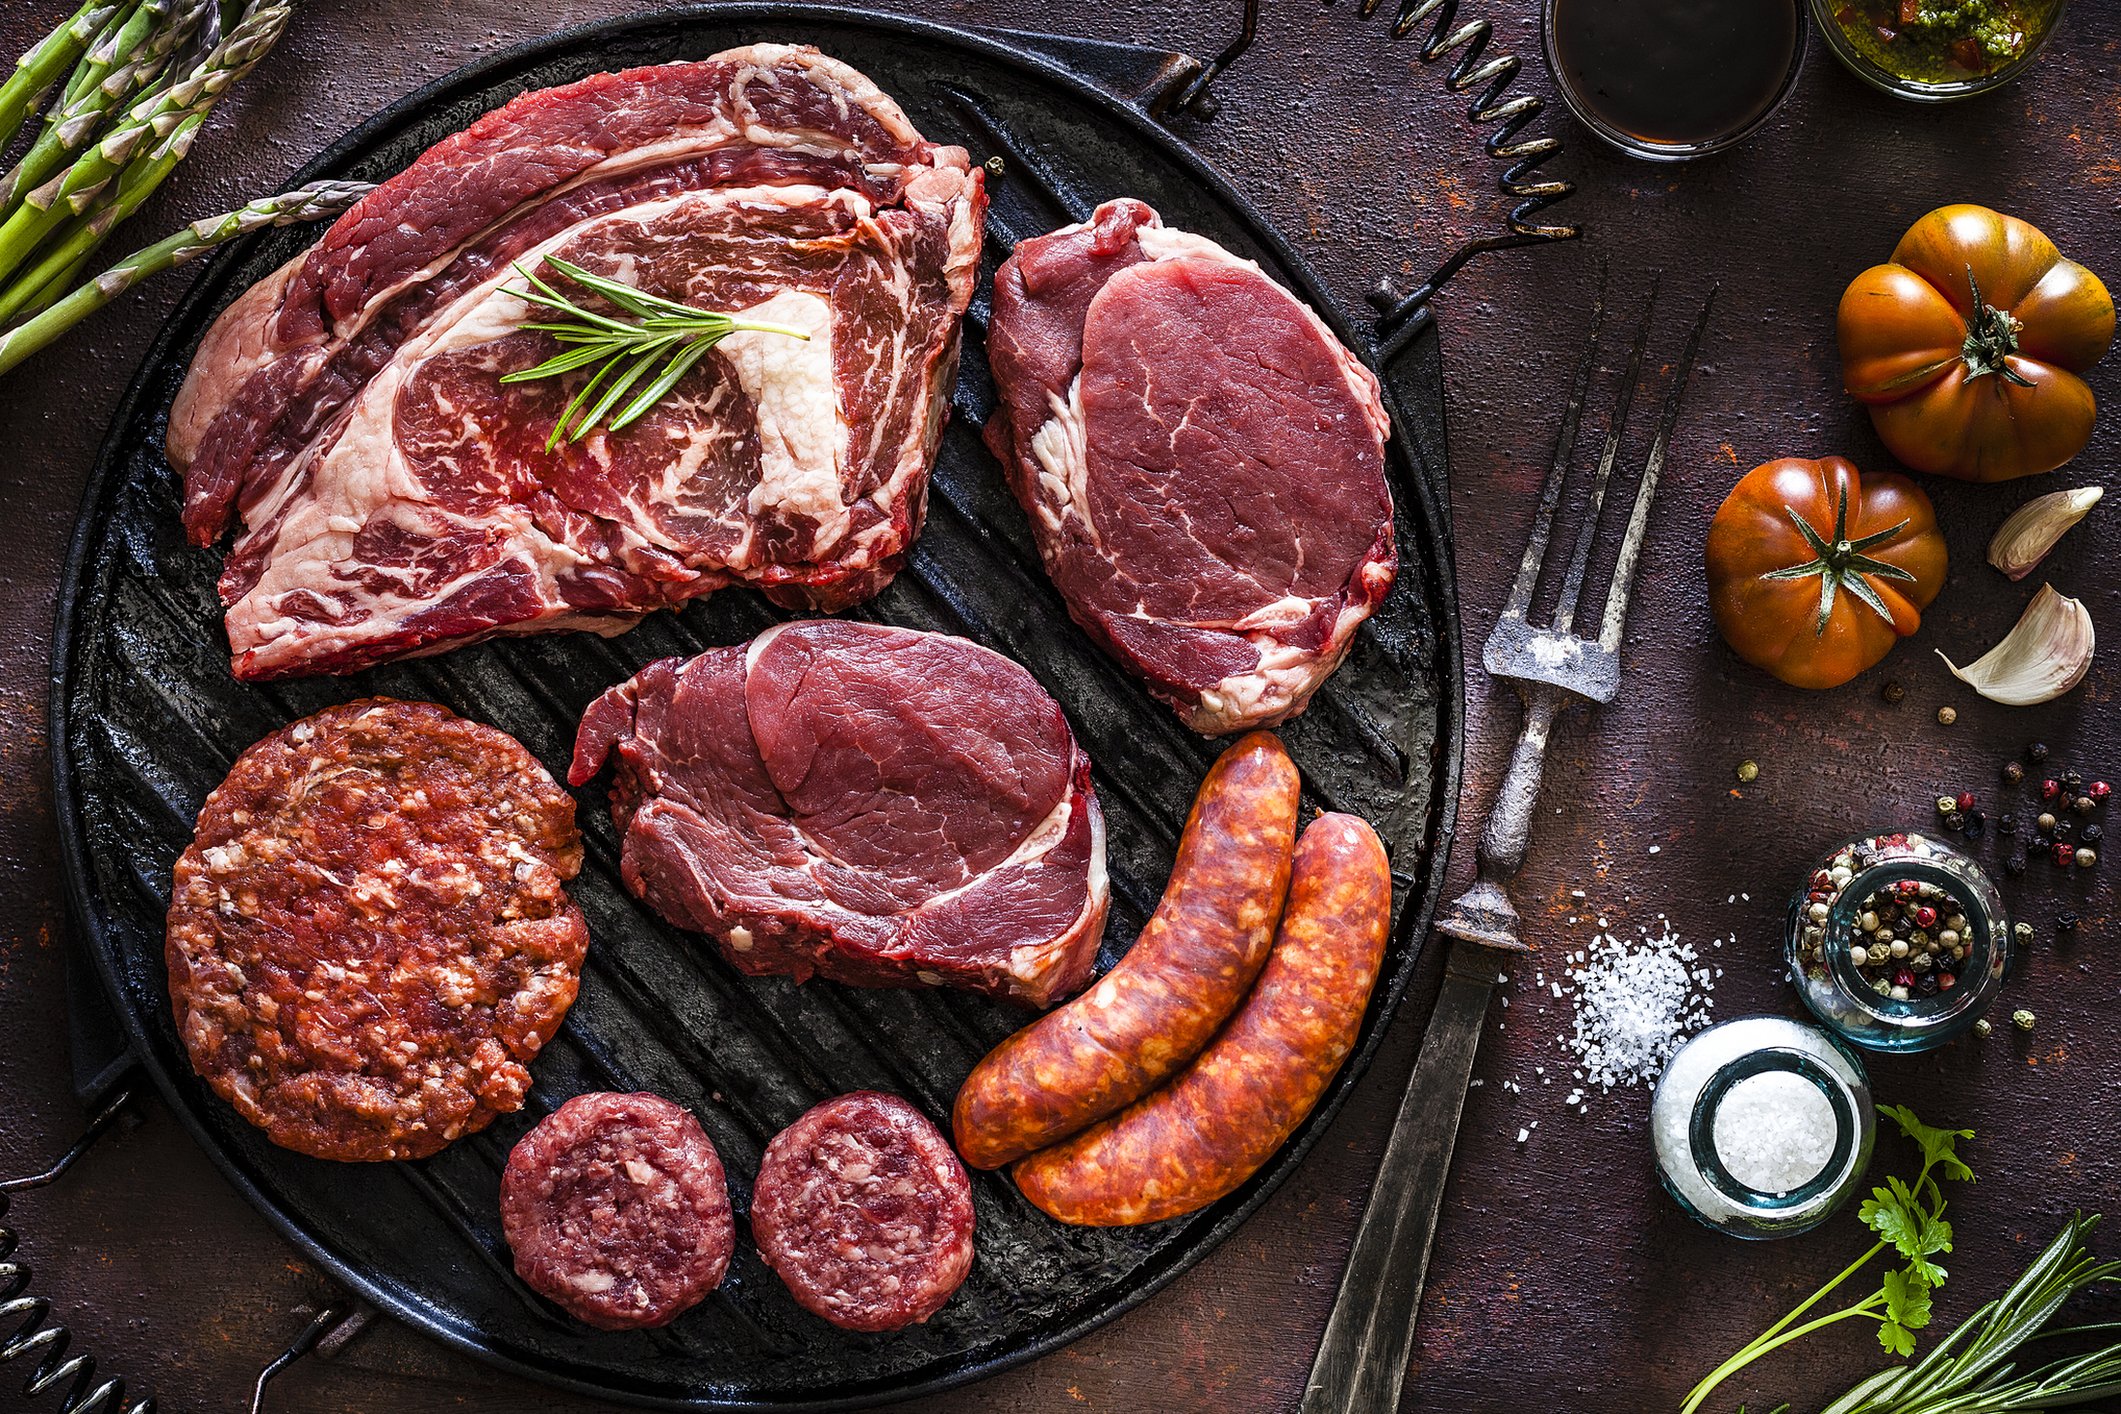 Various cuts of meat on an iron skillet